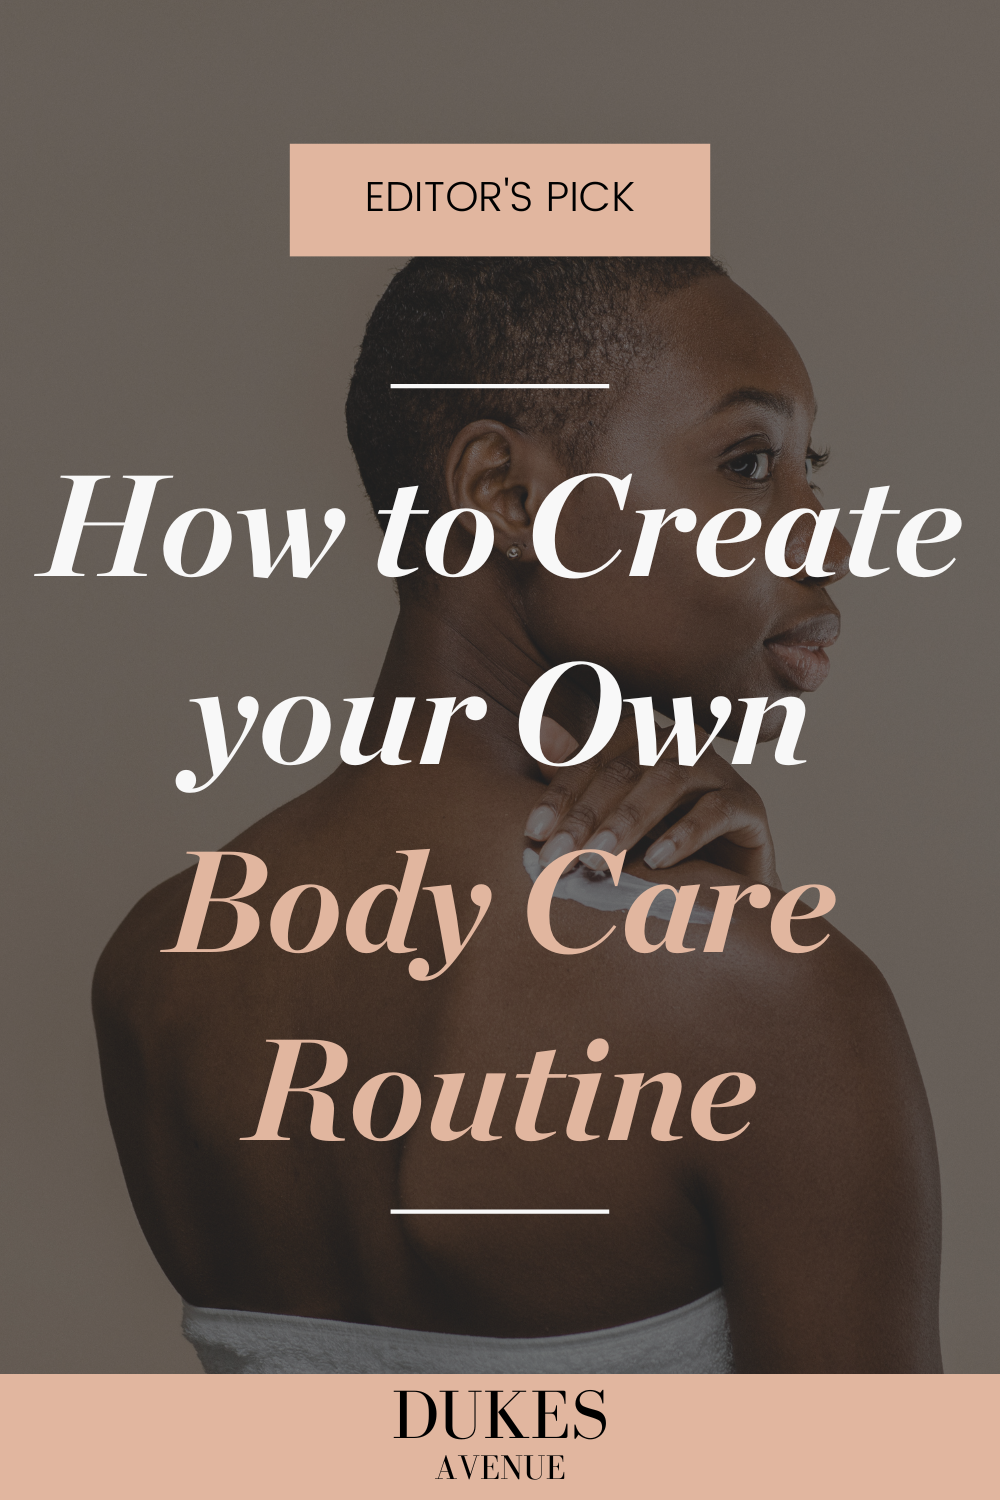 Picture of woman looking back with text overlay 'How to Create Your Own Body Care Routine Pin'